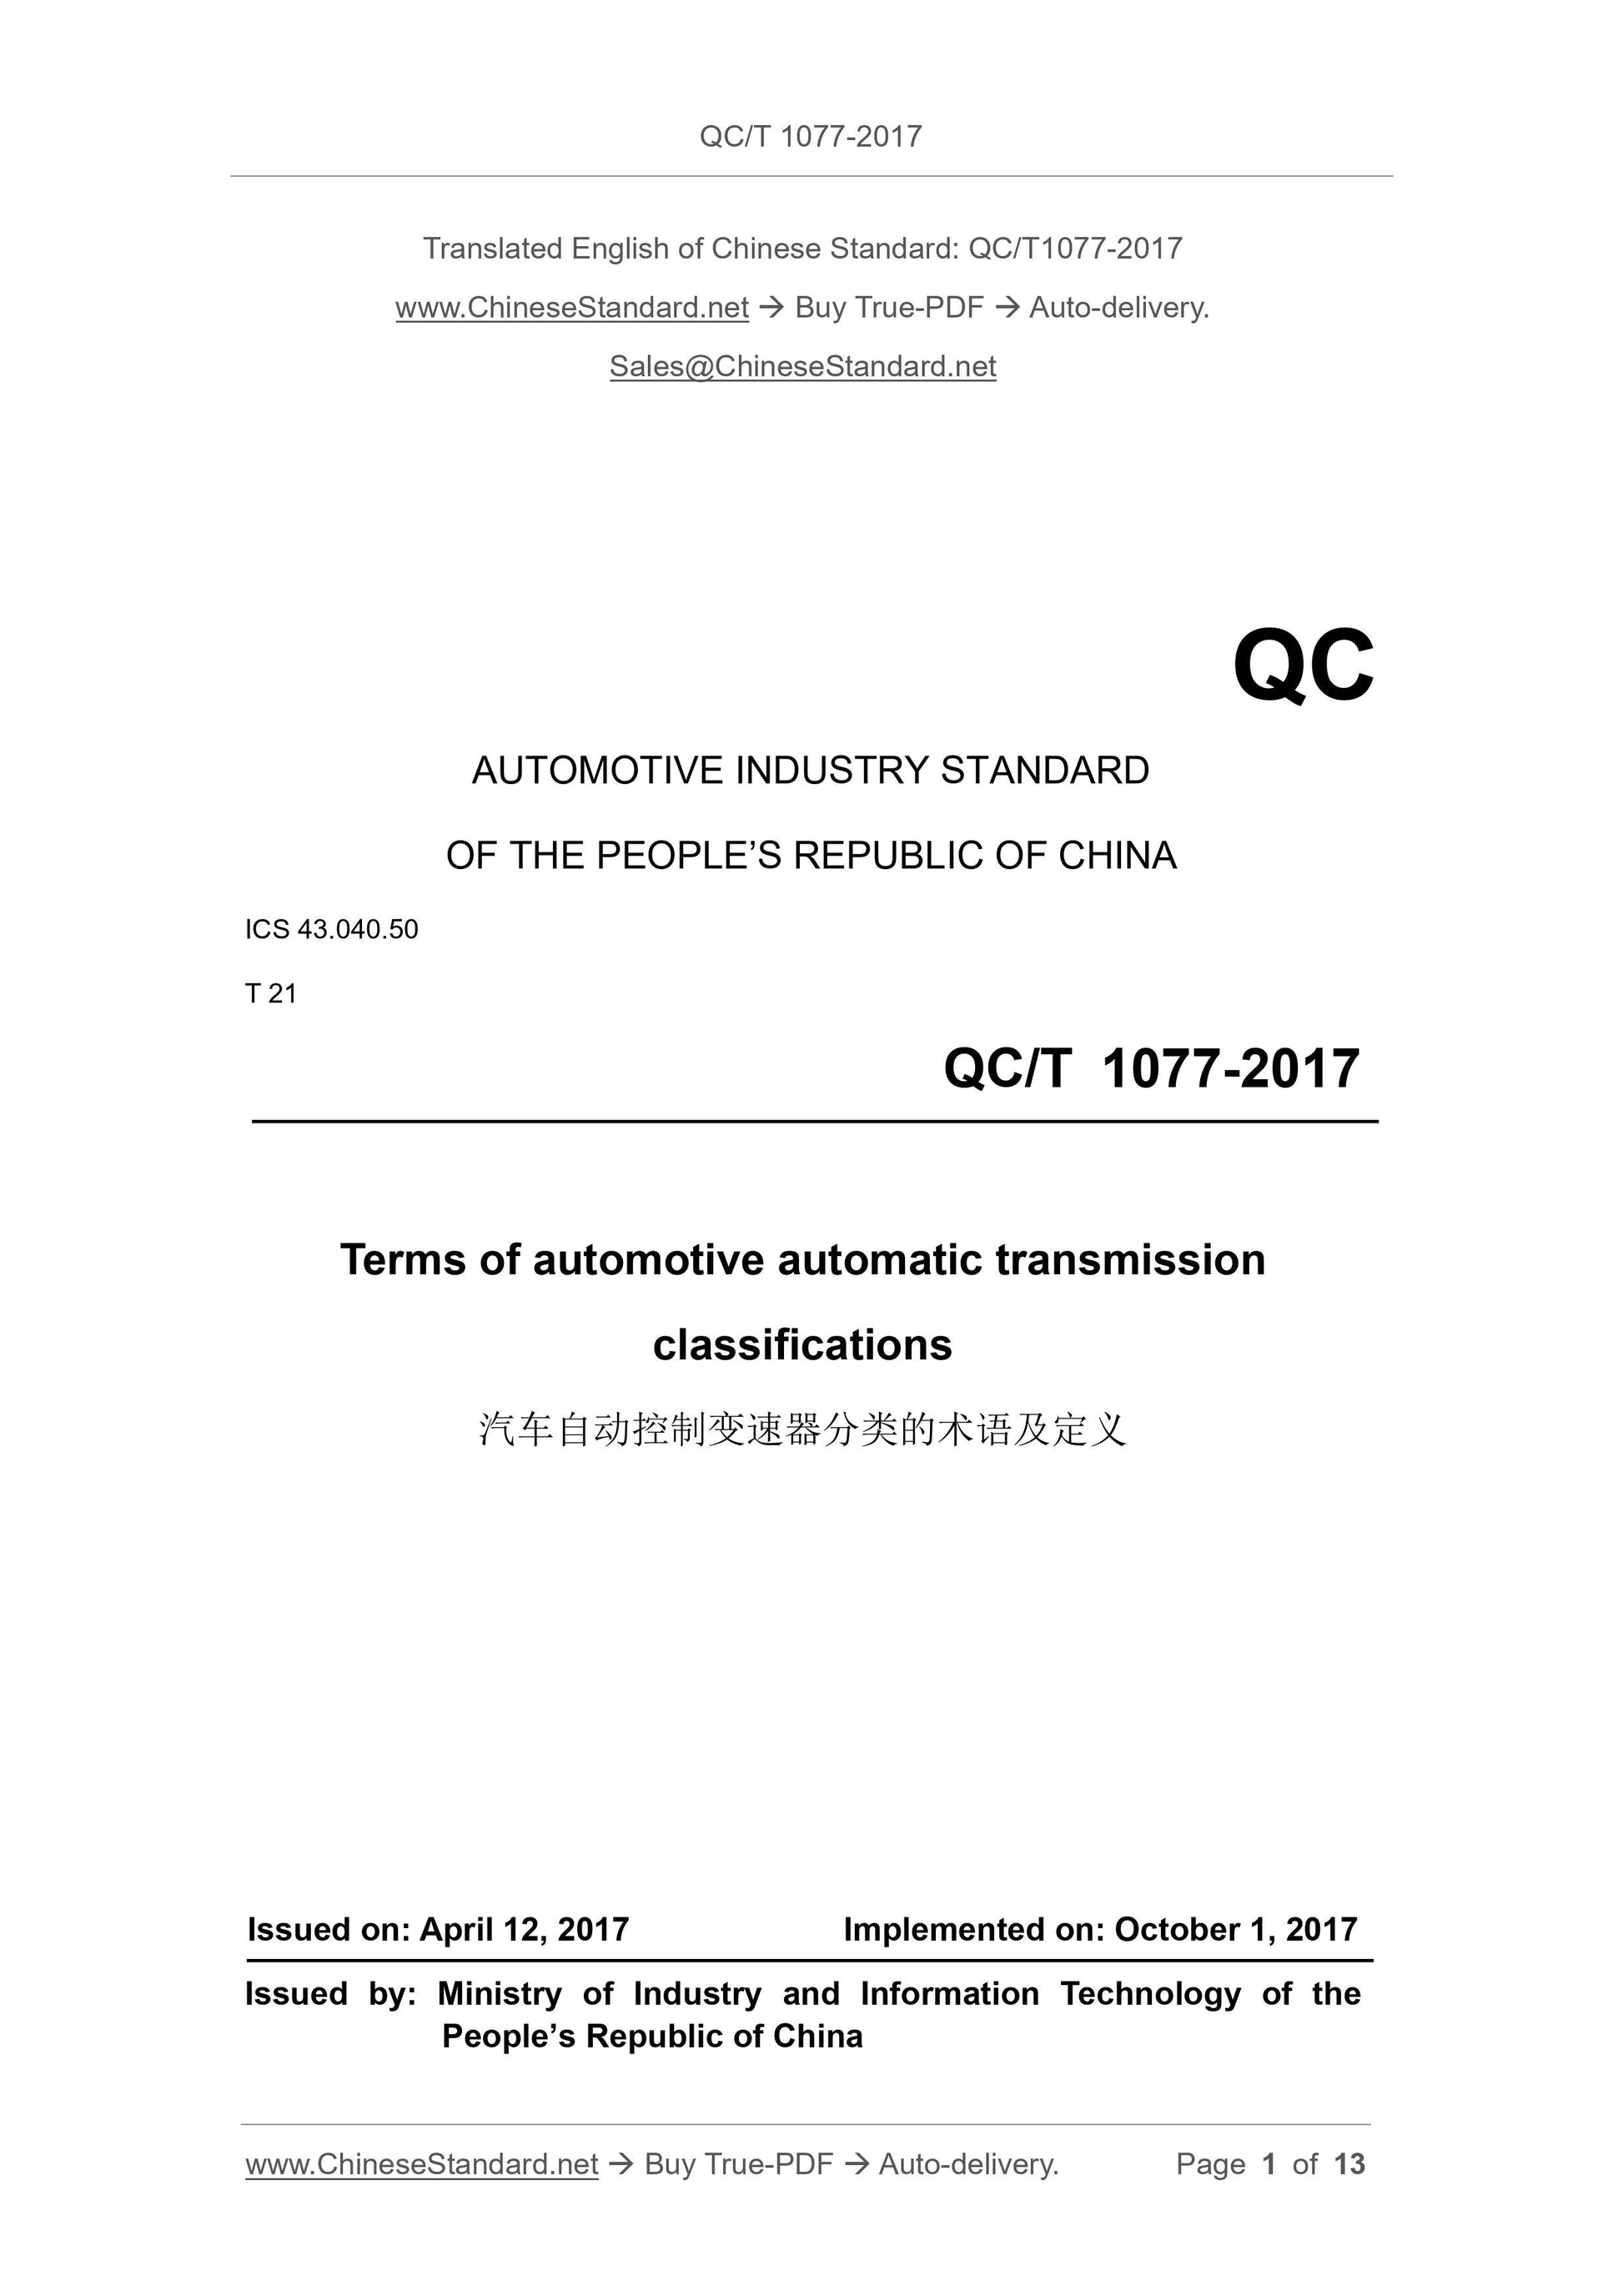 QC/T 1077-2017 Page 1